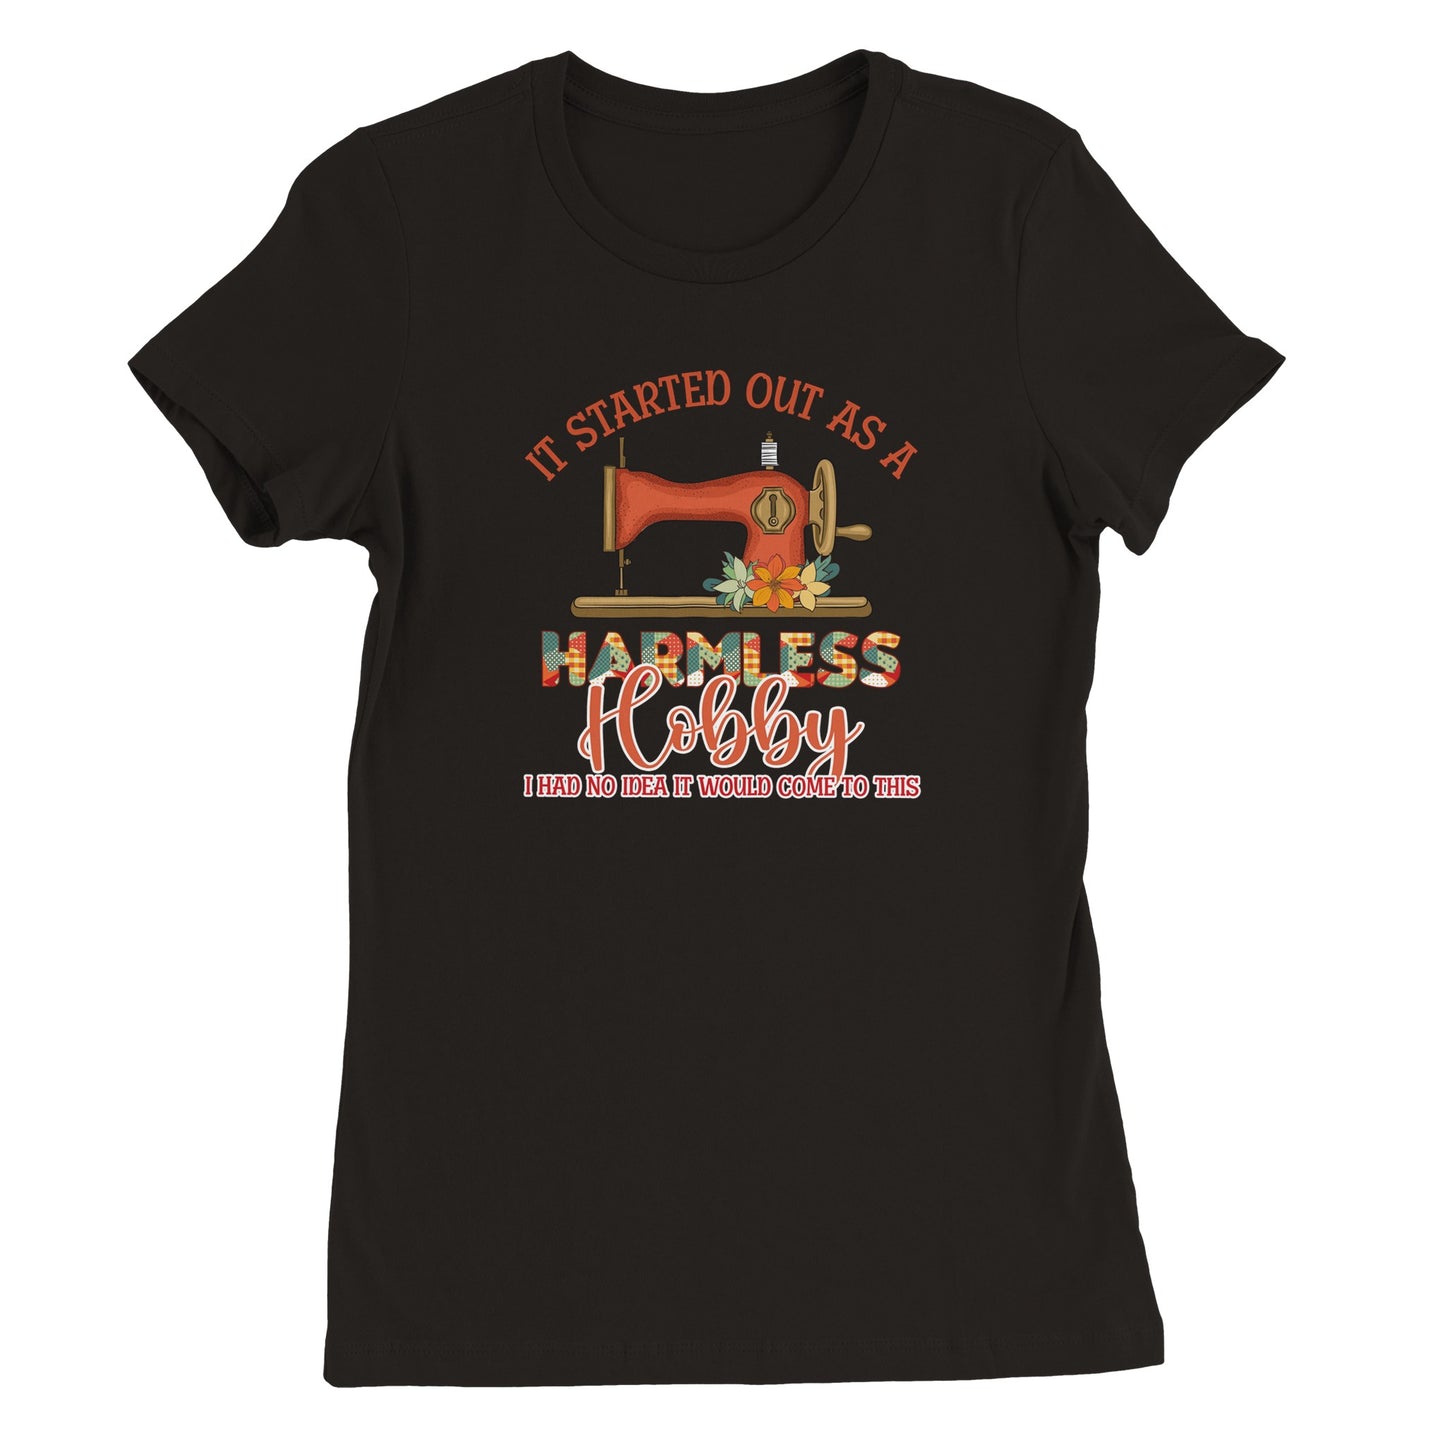 It Started Out as a Harmless Hobby Quilting T-Shirt - Premium Women's Crewneck T-shirt